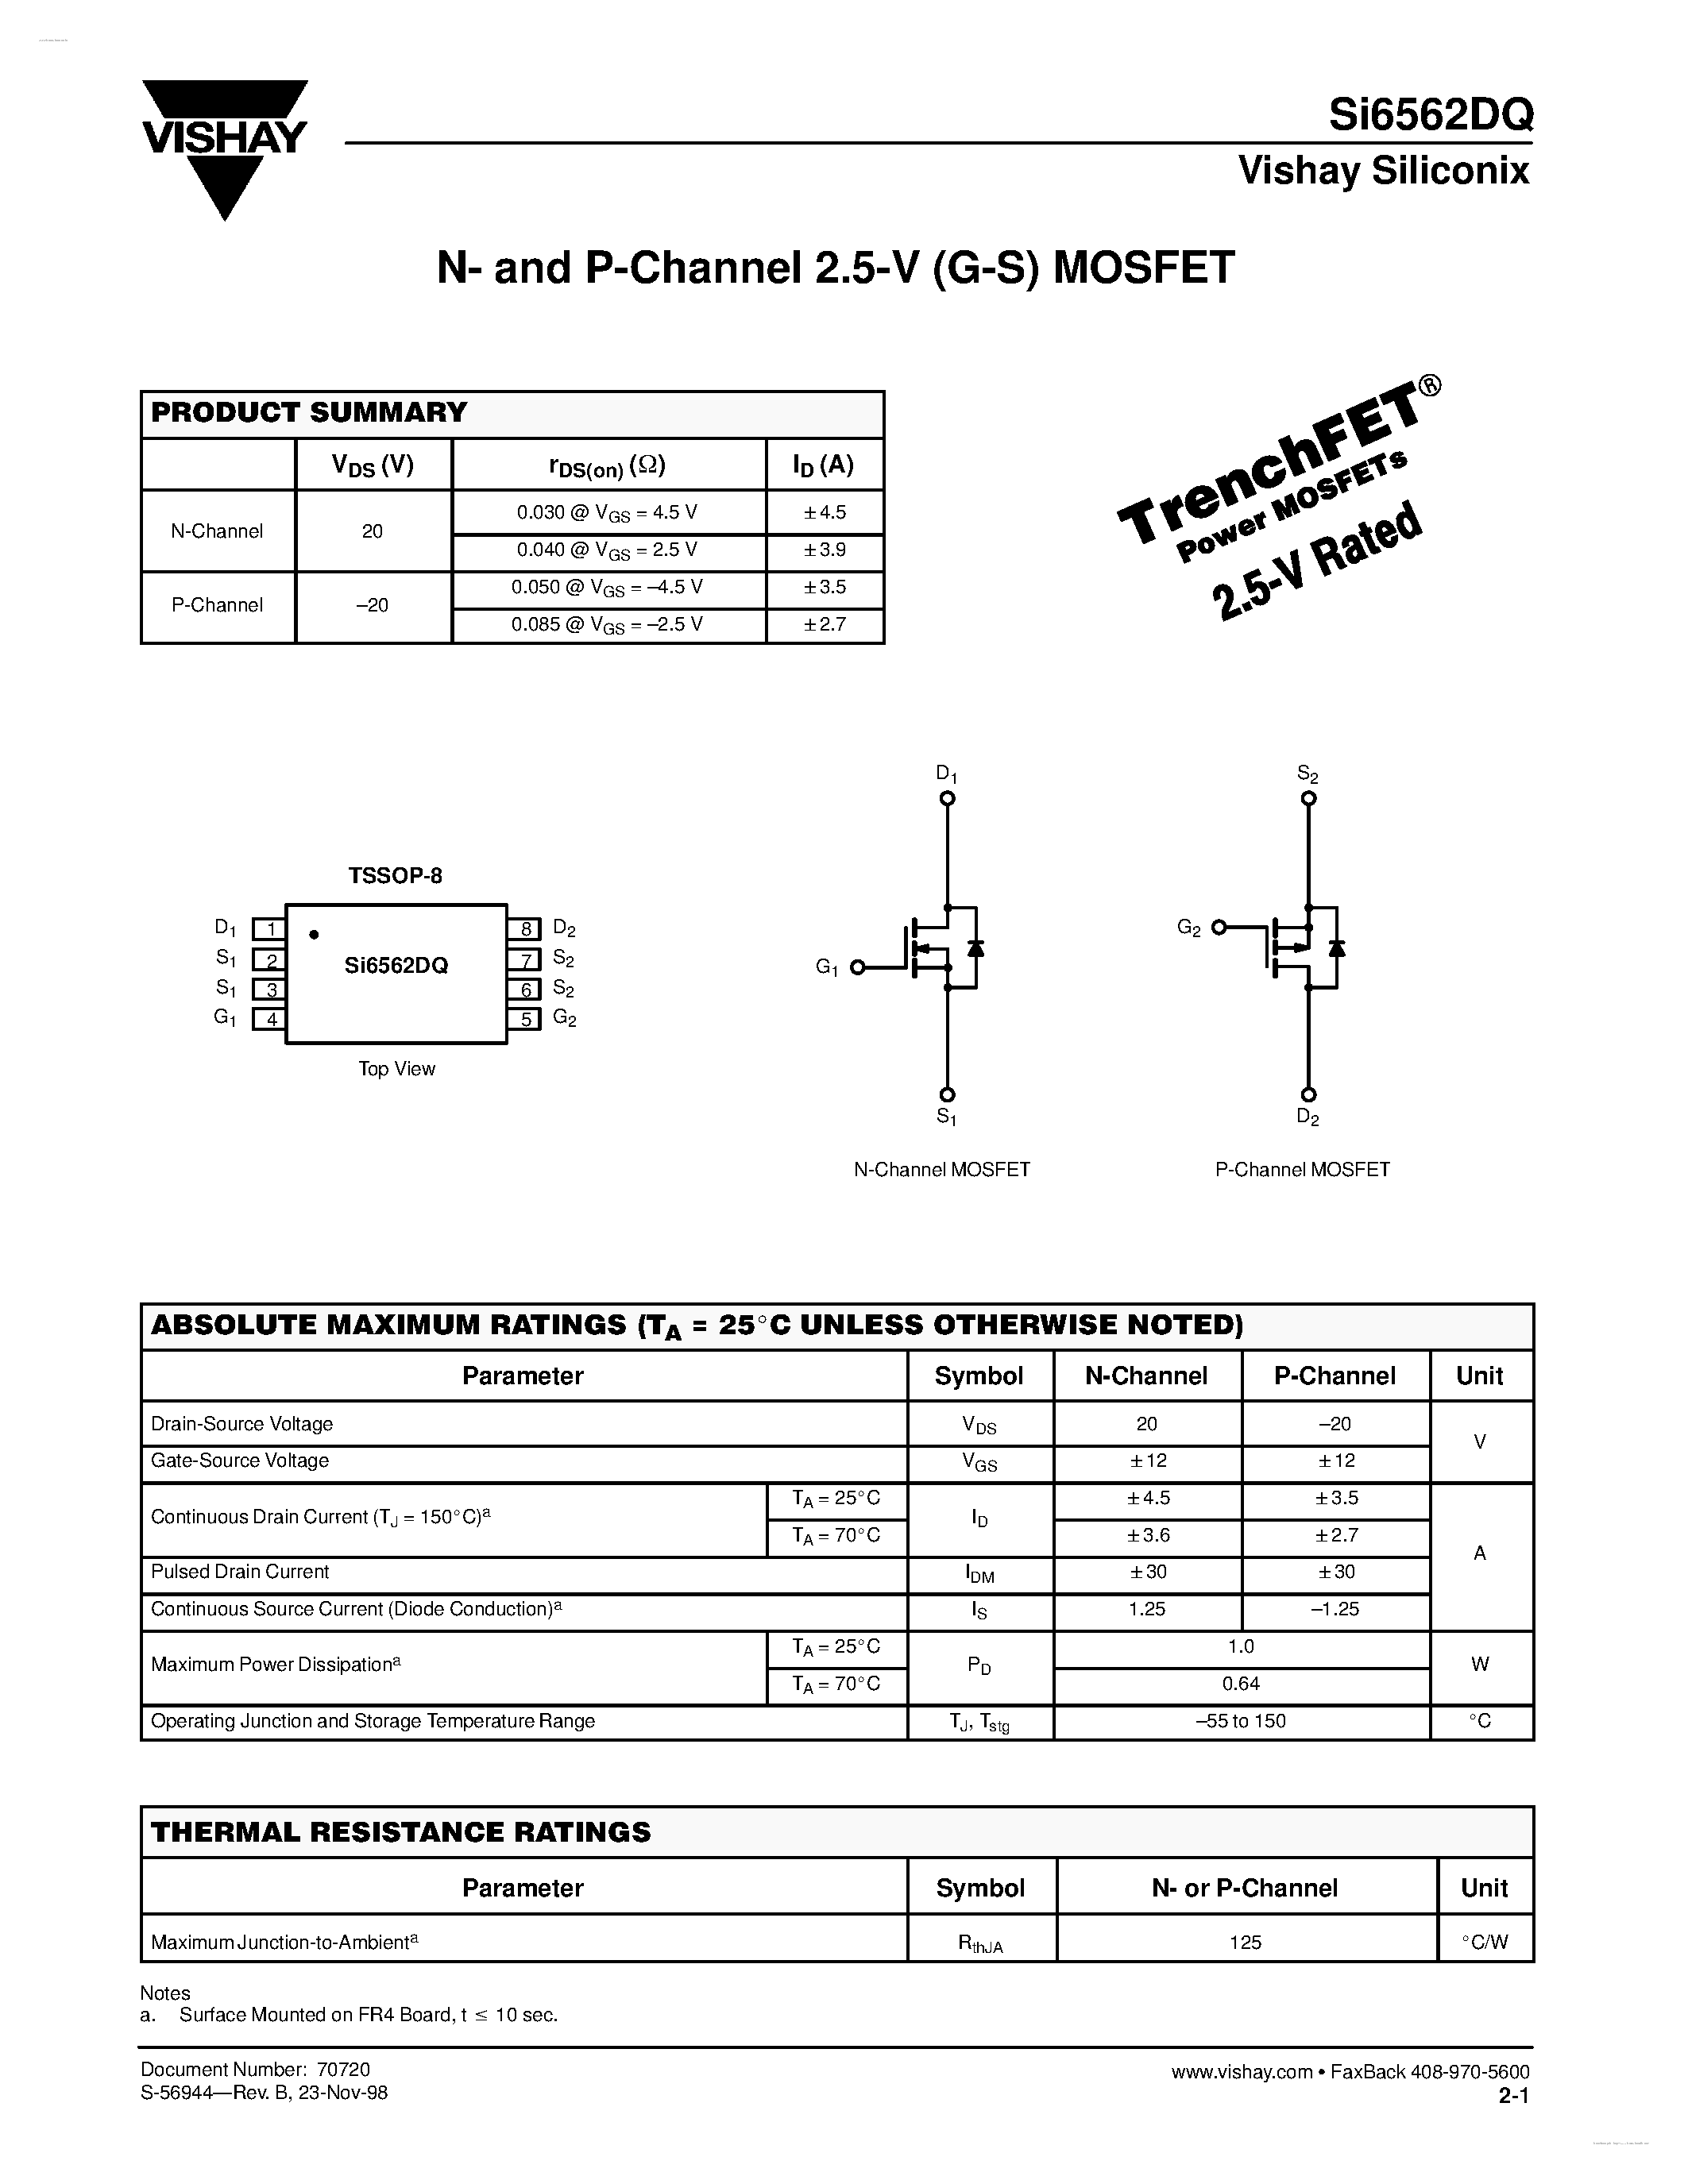 Datasheet SI6562DQ - N- and P-Channel 2.5-V (G-S) MOSFET page 1